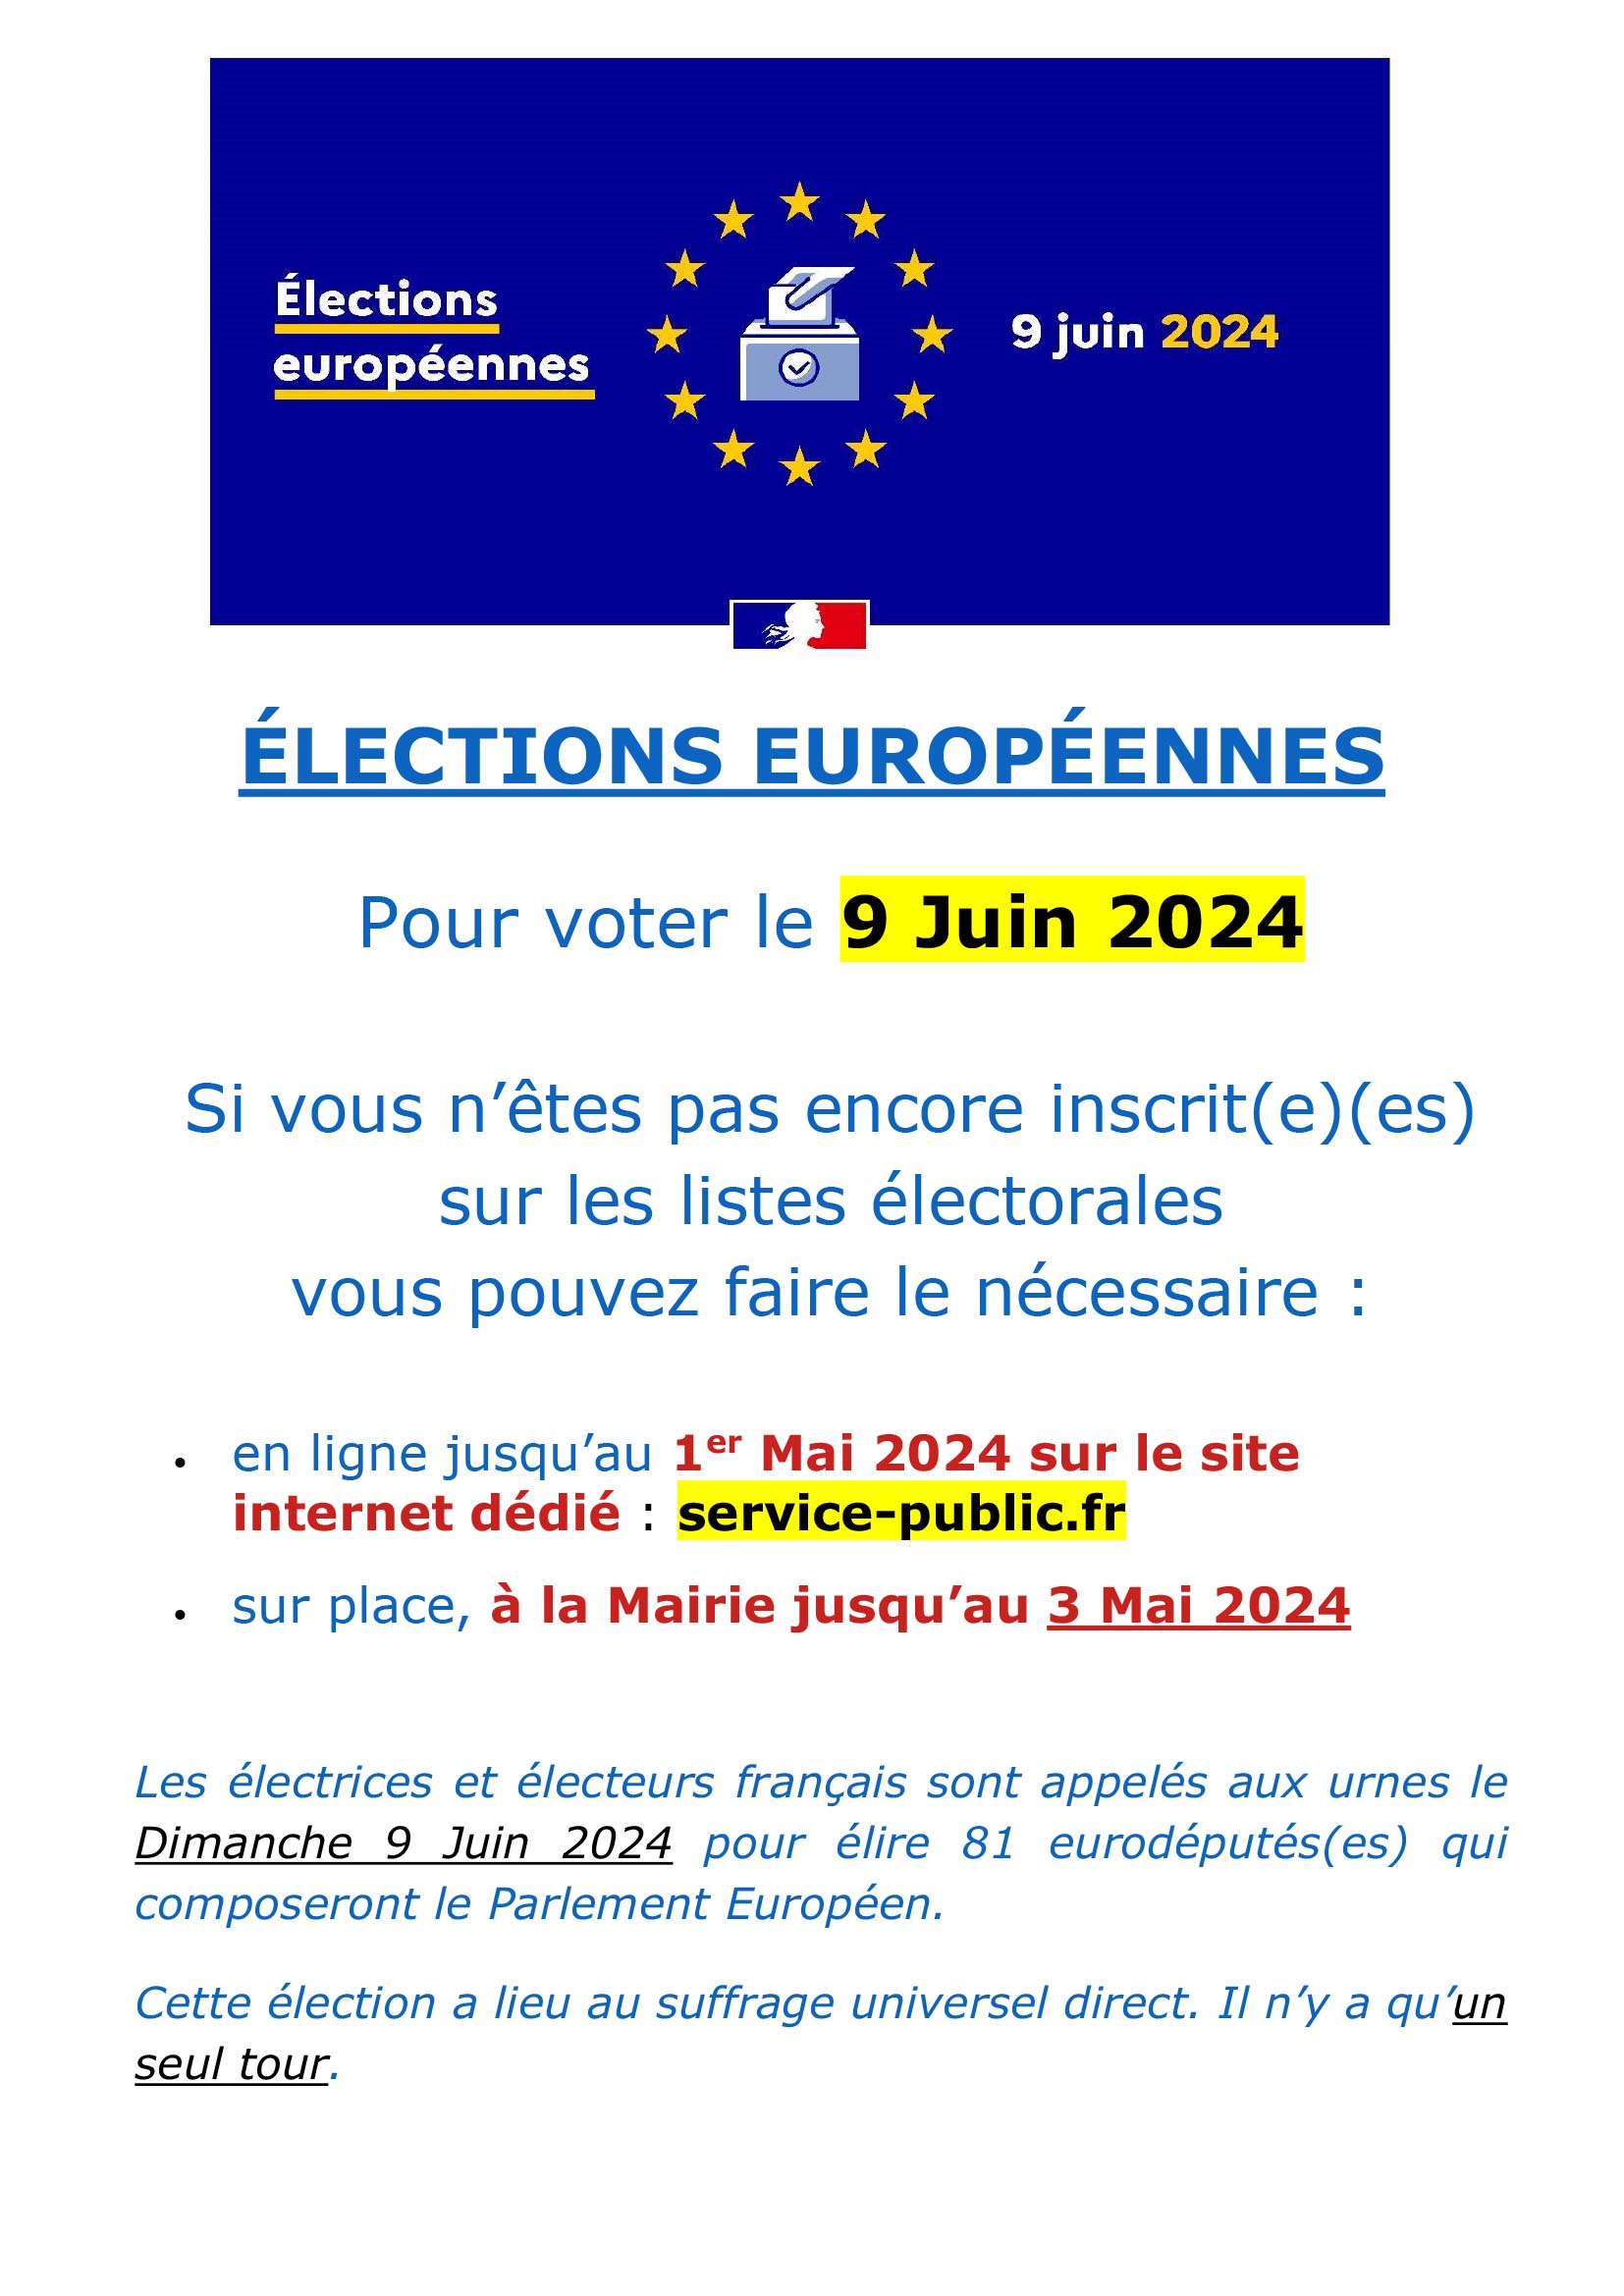 AFF ELECTIONS EUROPEENNES modif1